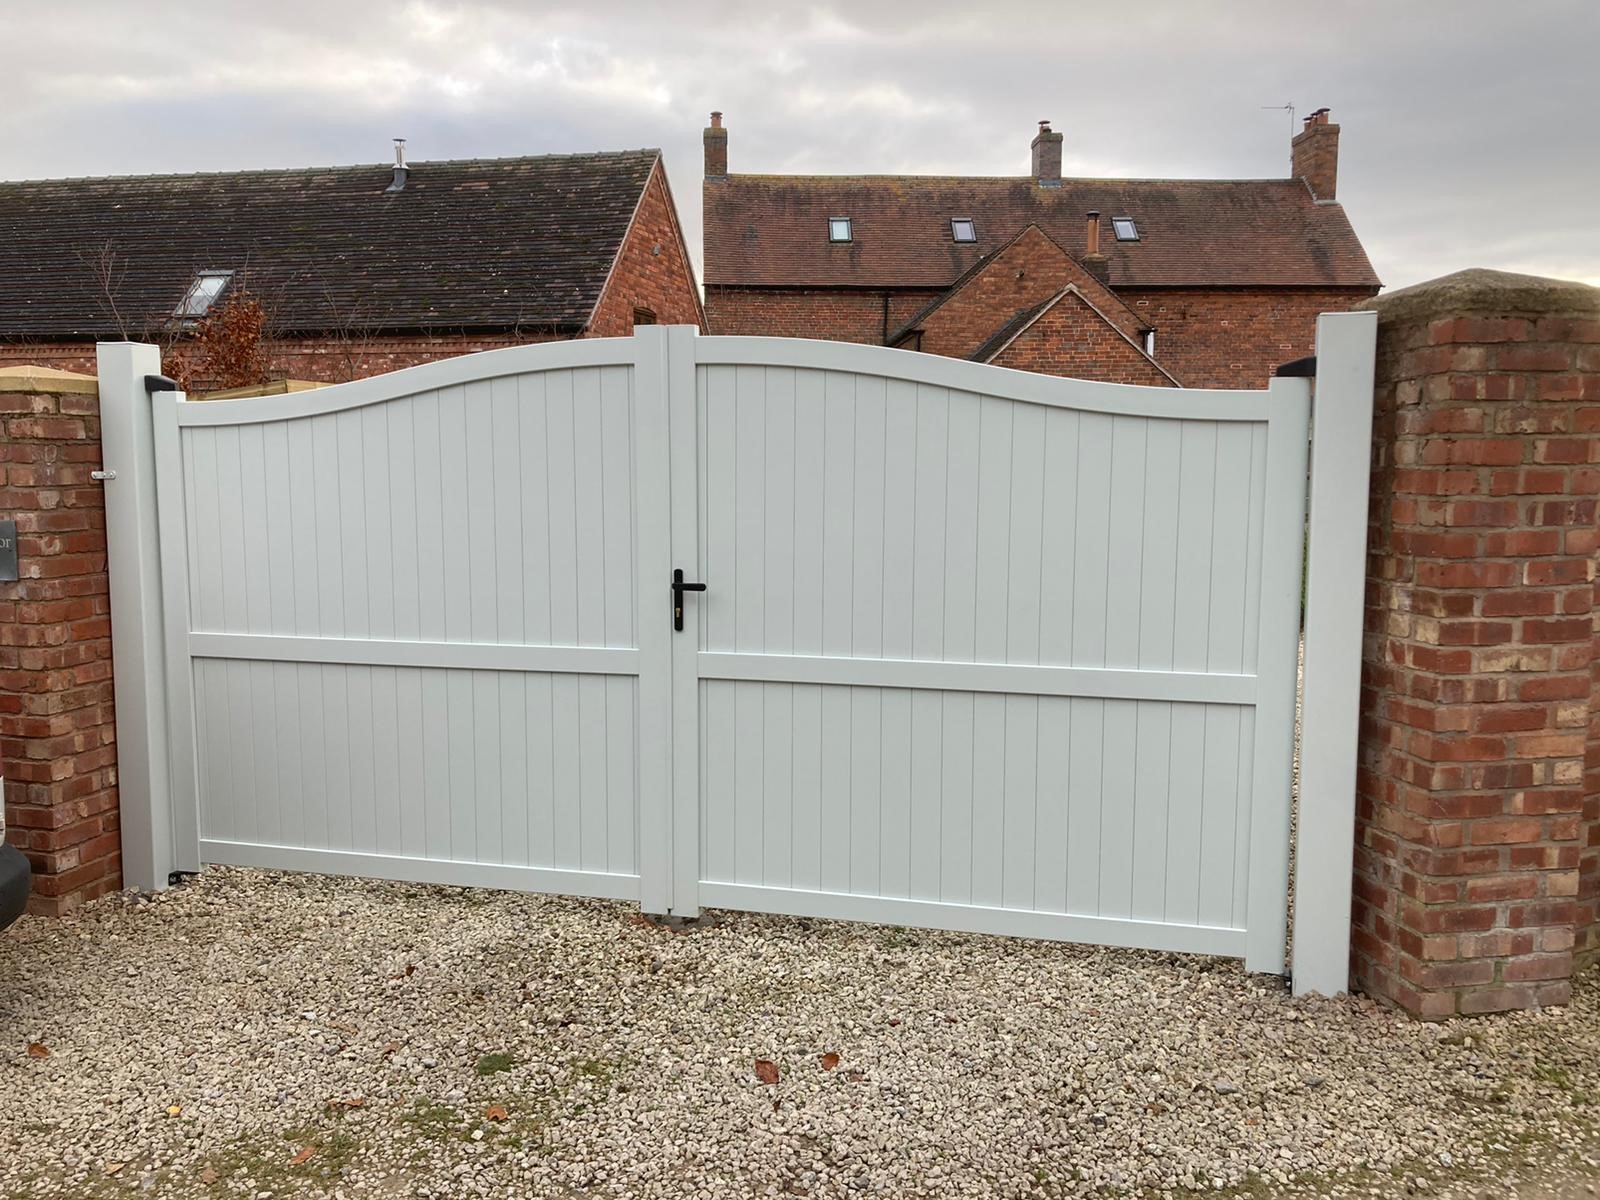 Arched double aluminium driveway gates in a non standard RAL colour